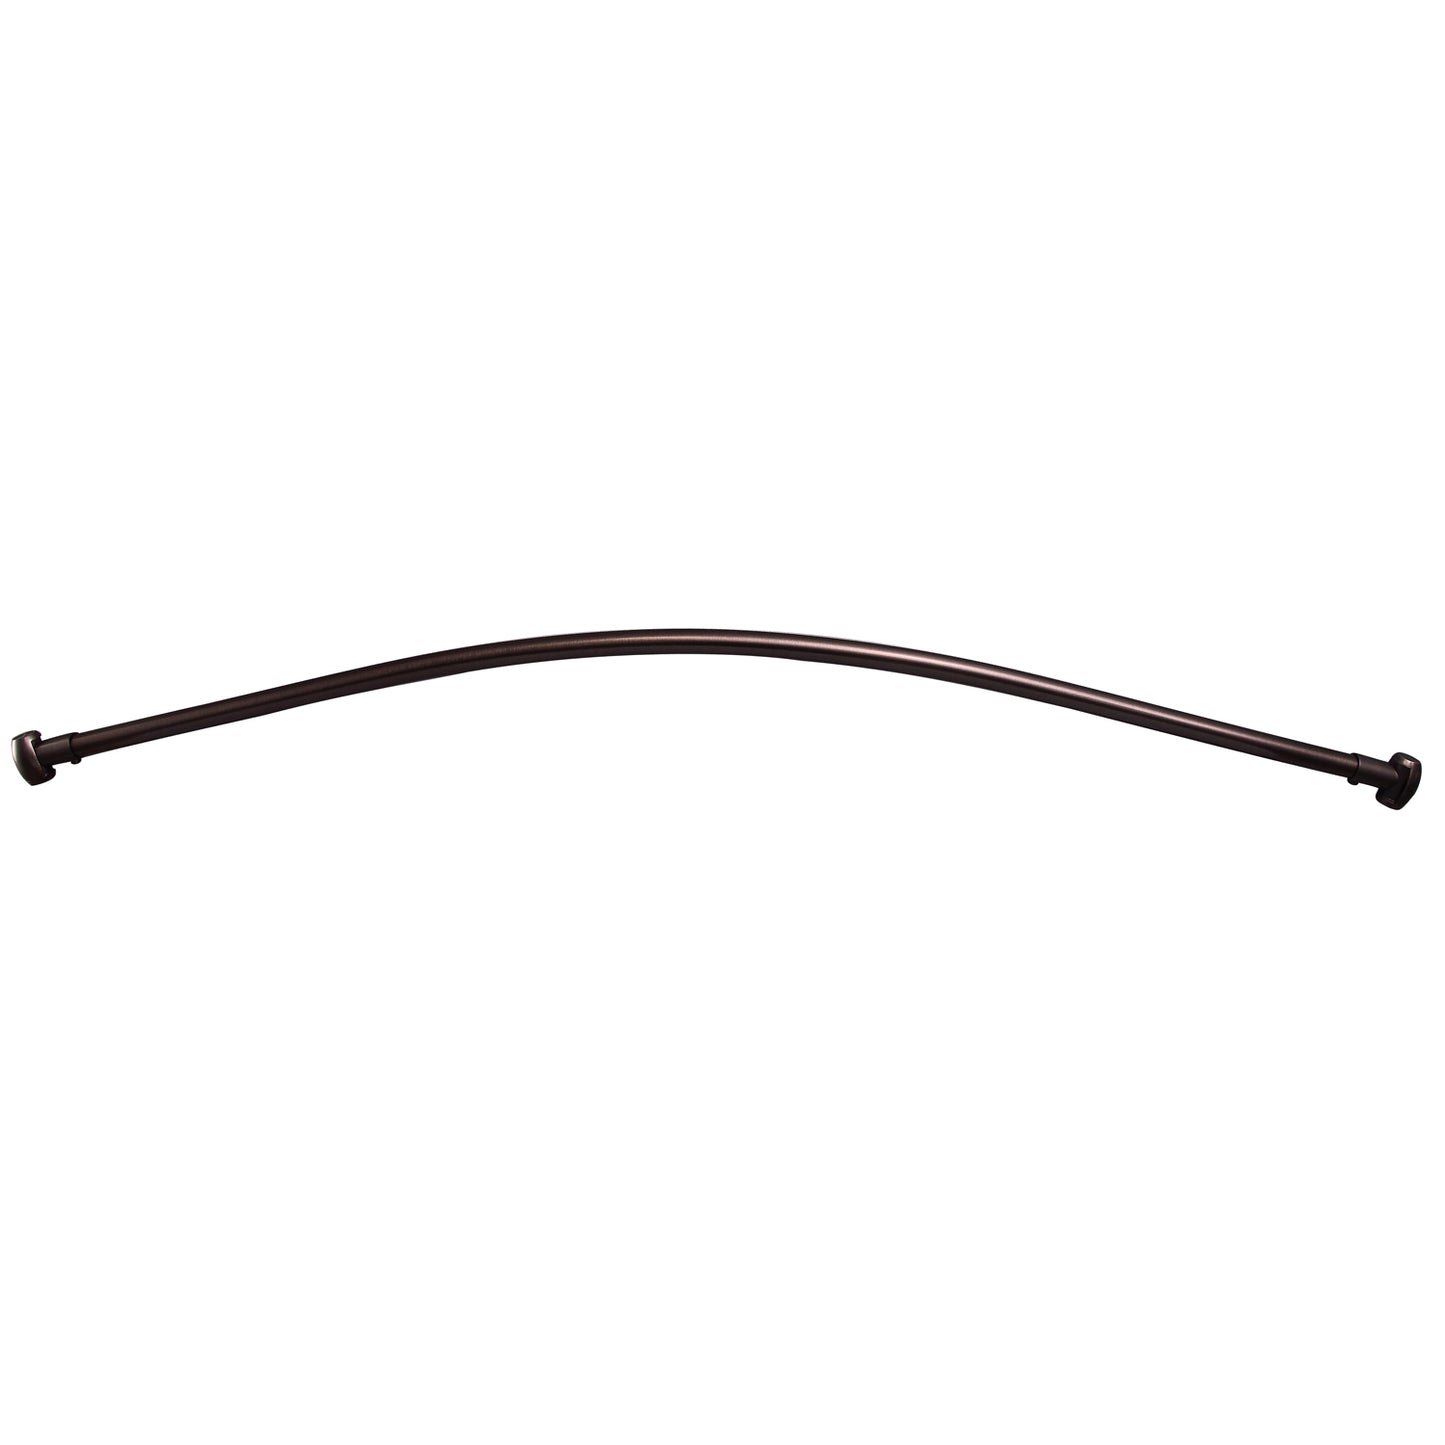 Curved 36" Shower Rod w/Flange in Oil Rubbed Bronze